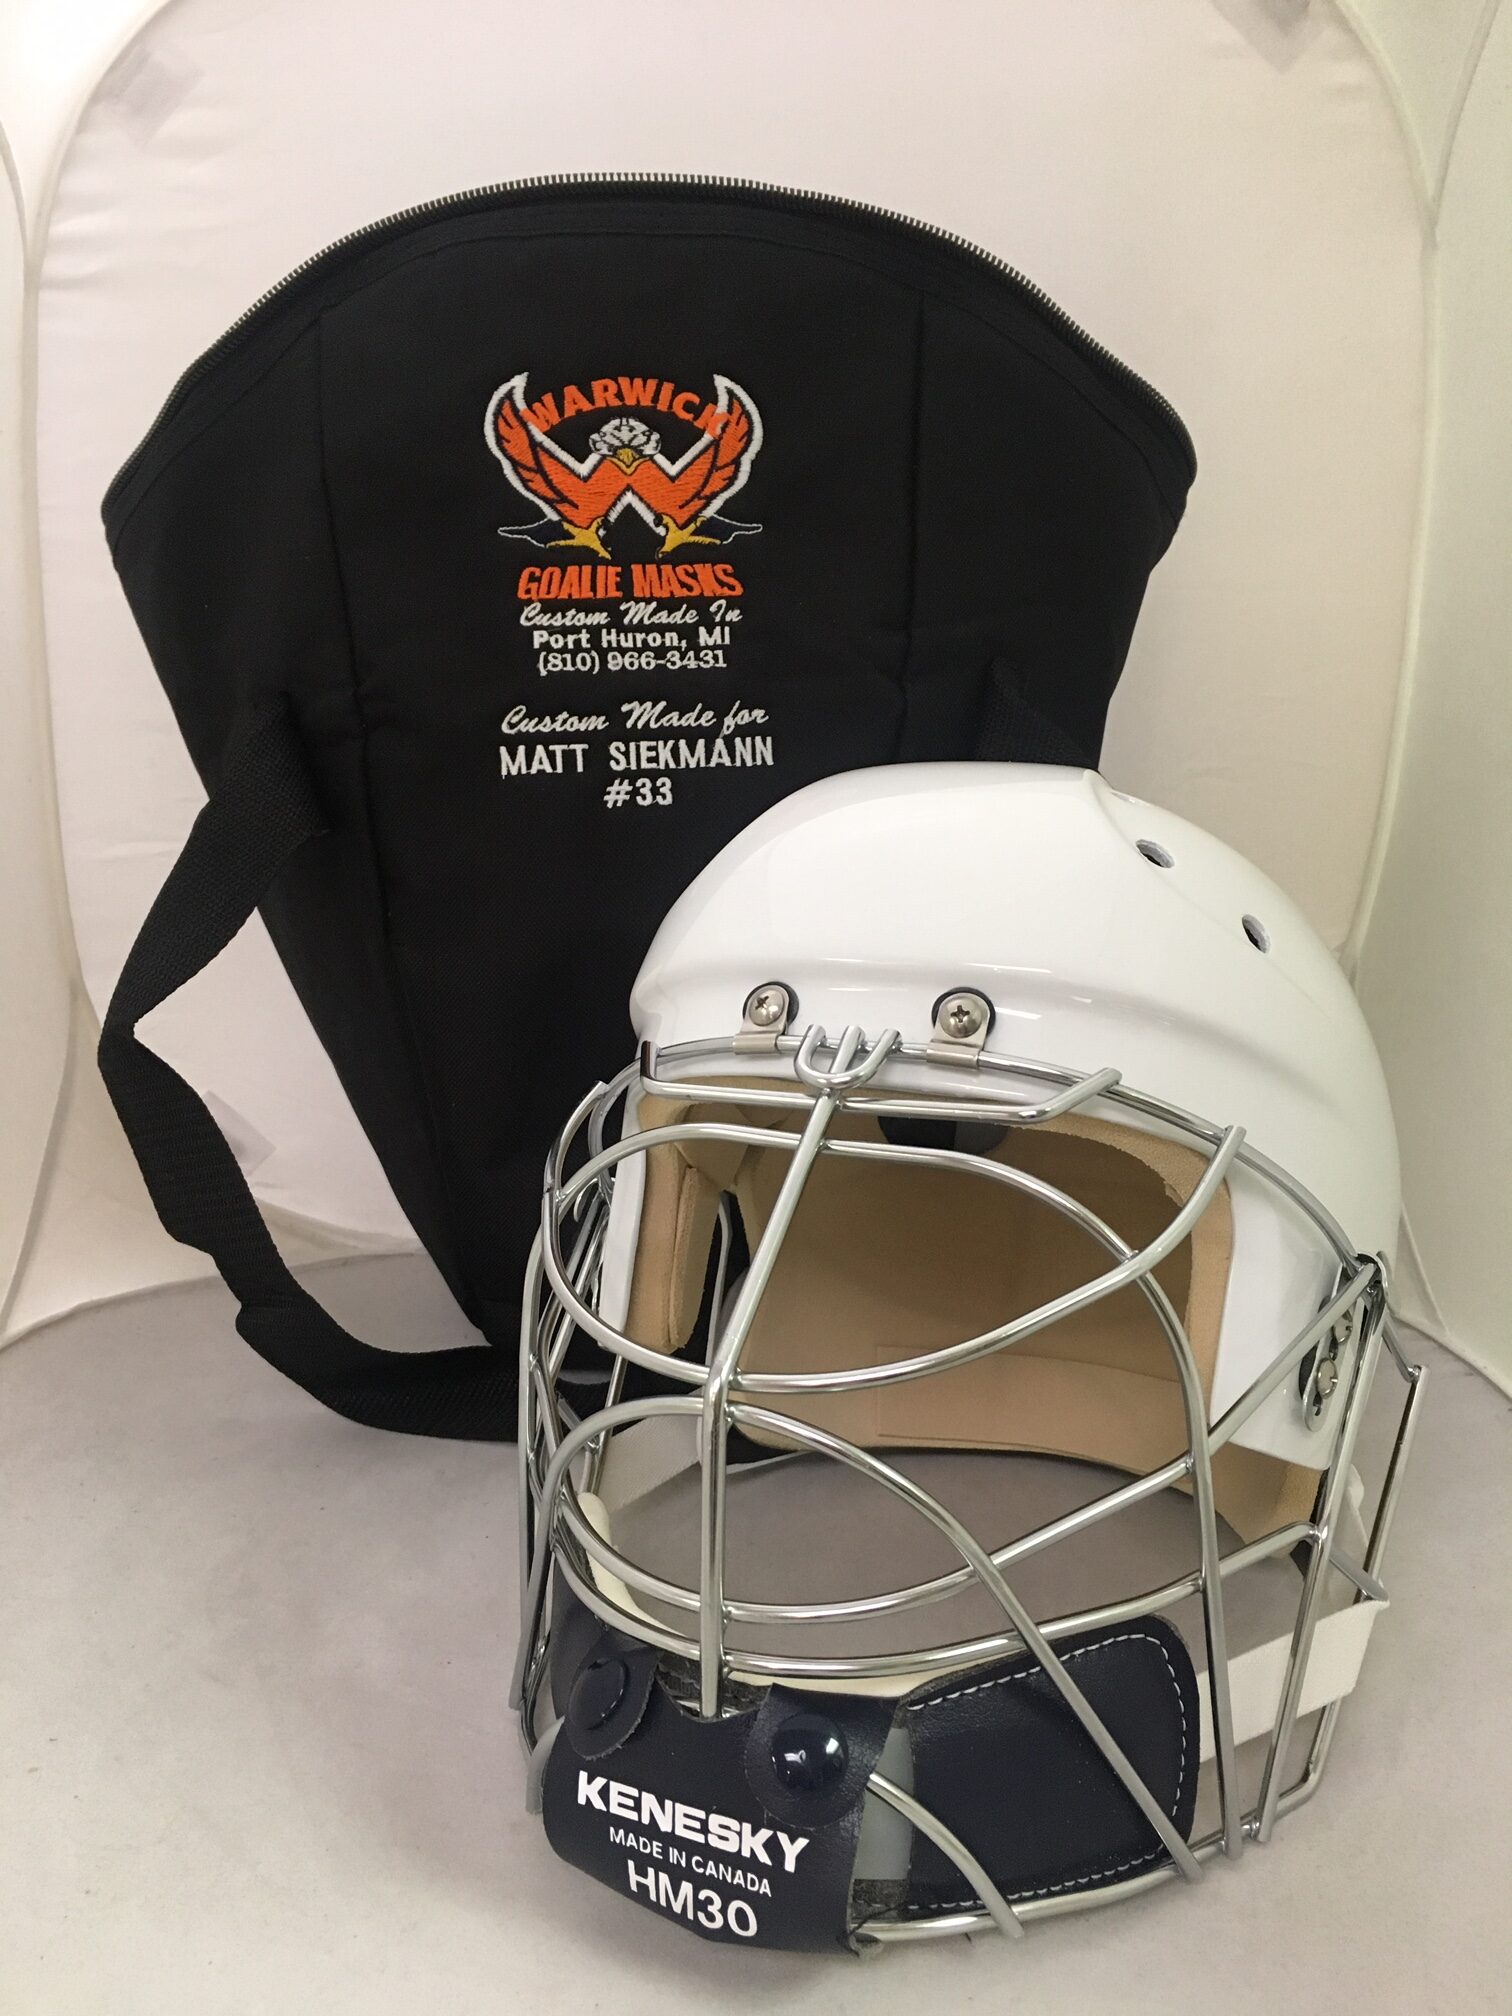 Warwick Mask Company - Custom Crafted Goalie Masks, Goalie Mask Refurbish  and Reconditioning, and Goalie Mask Repair